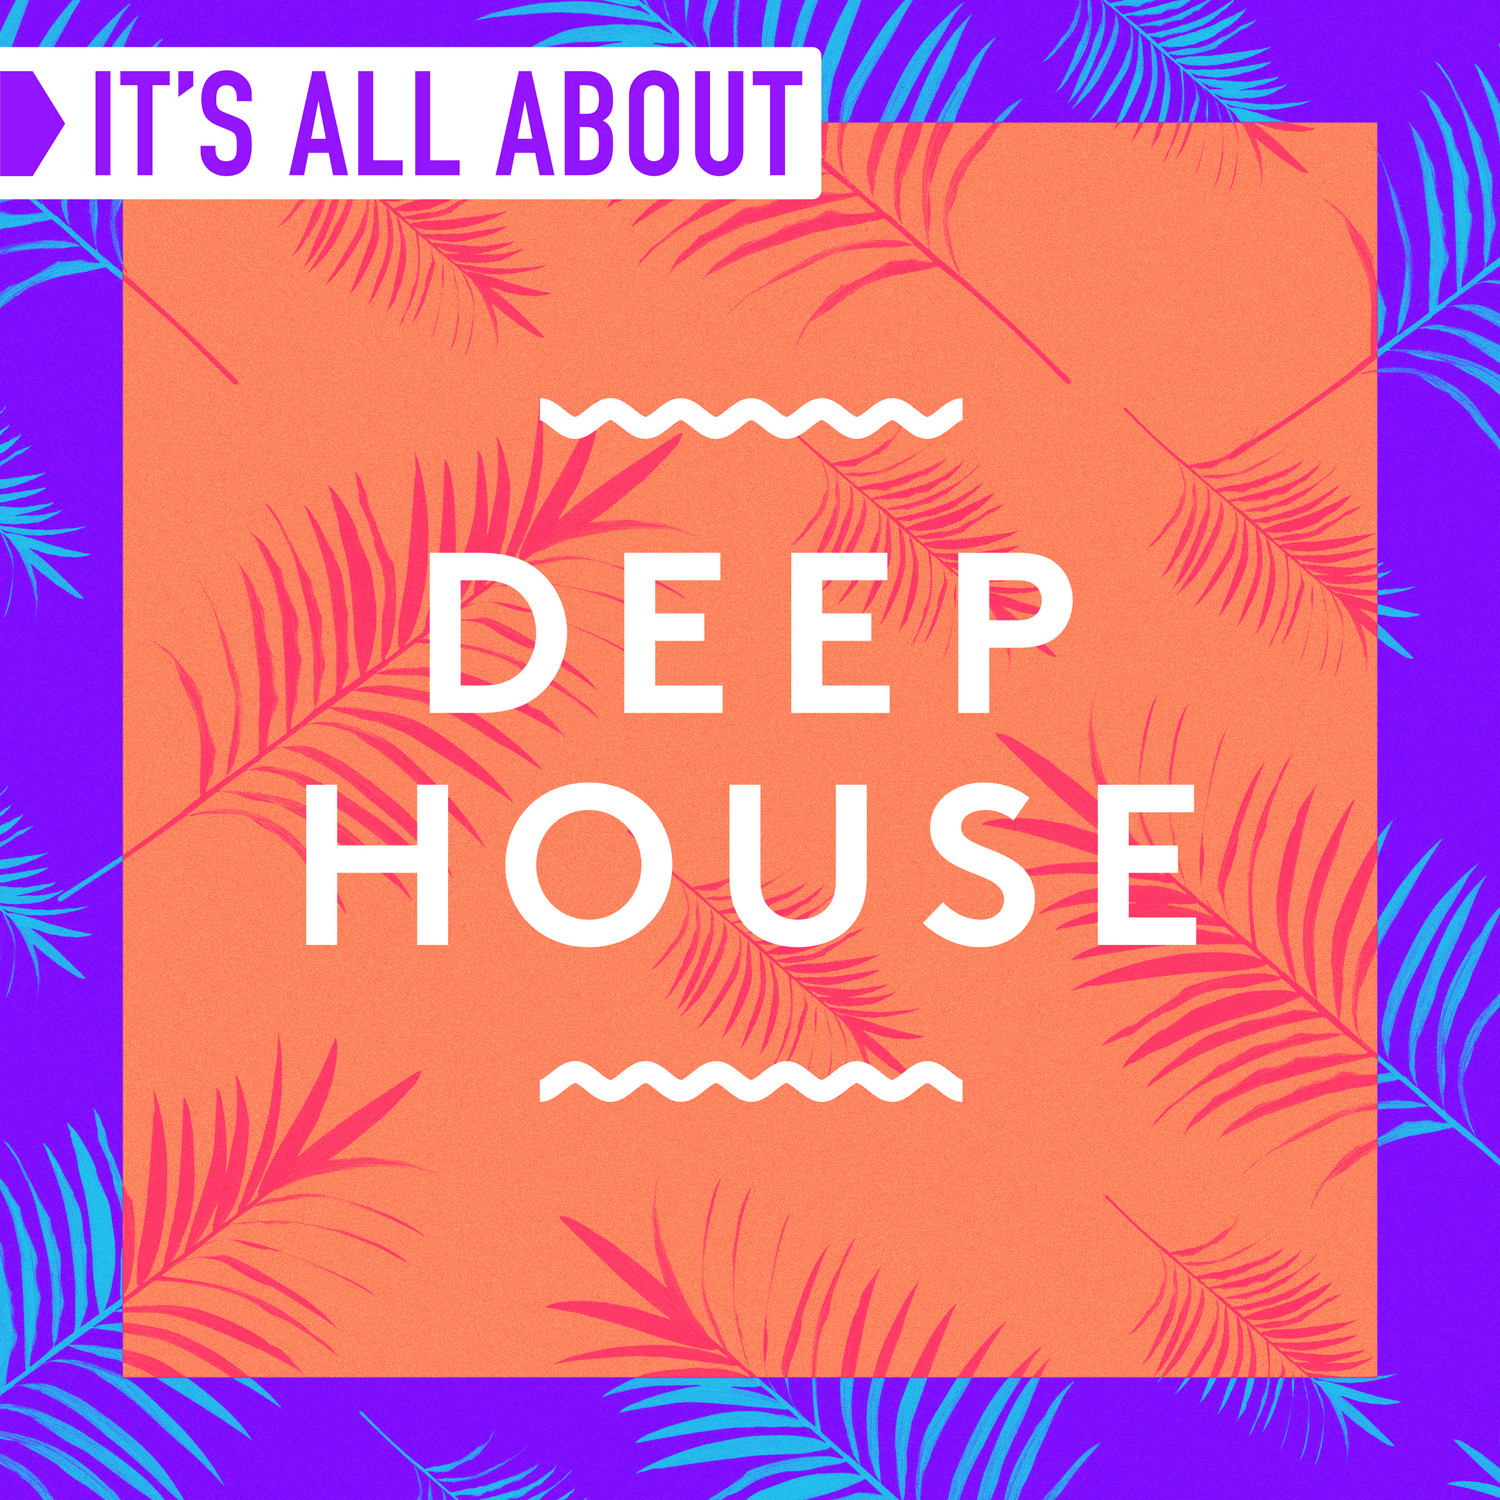 It's All About Deep House